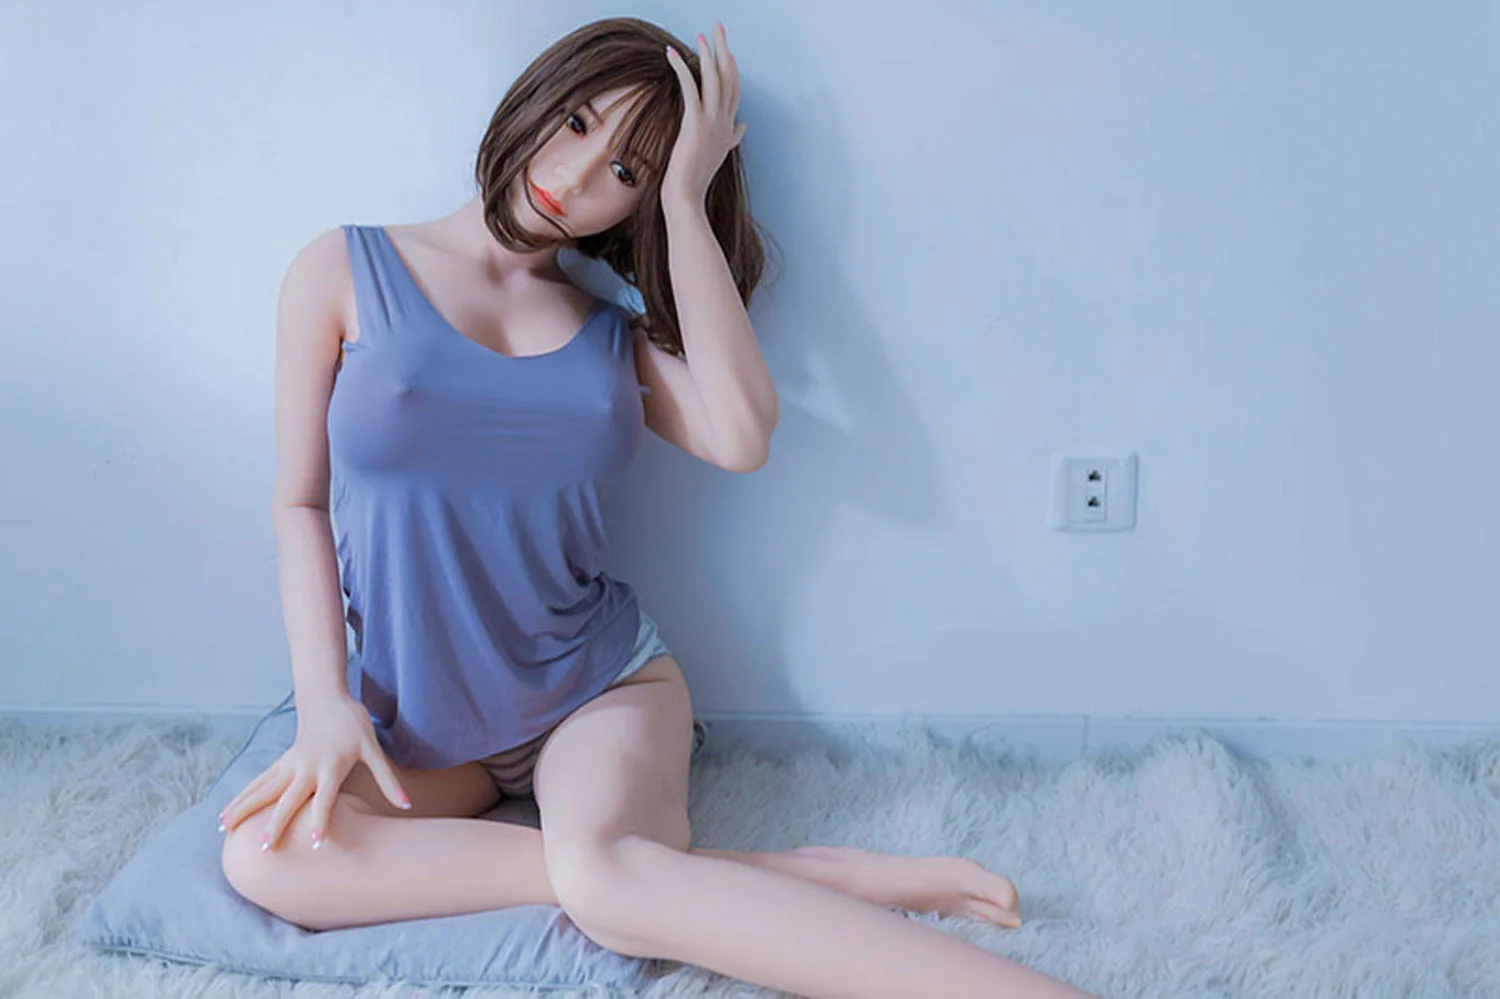 A sex doll sitting on the ground and touching her hair